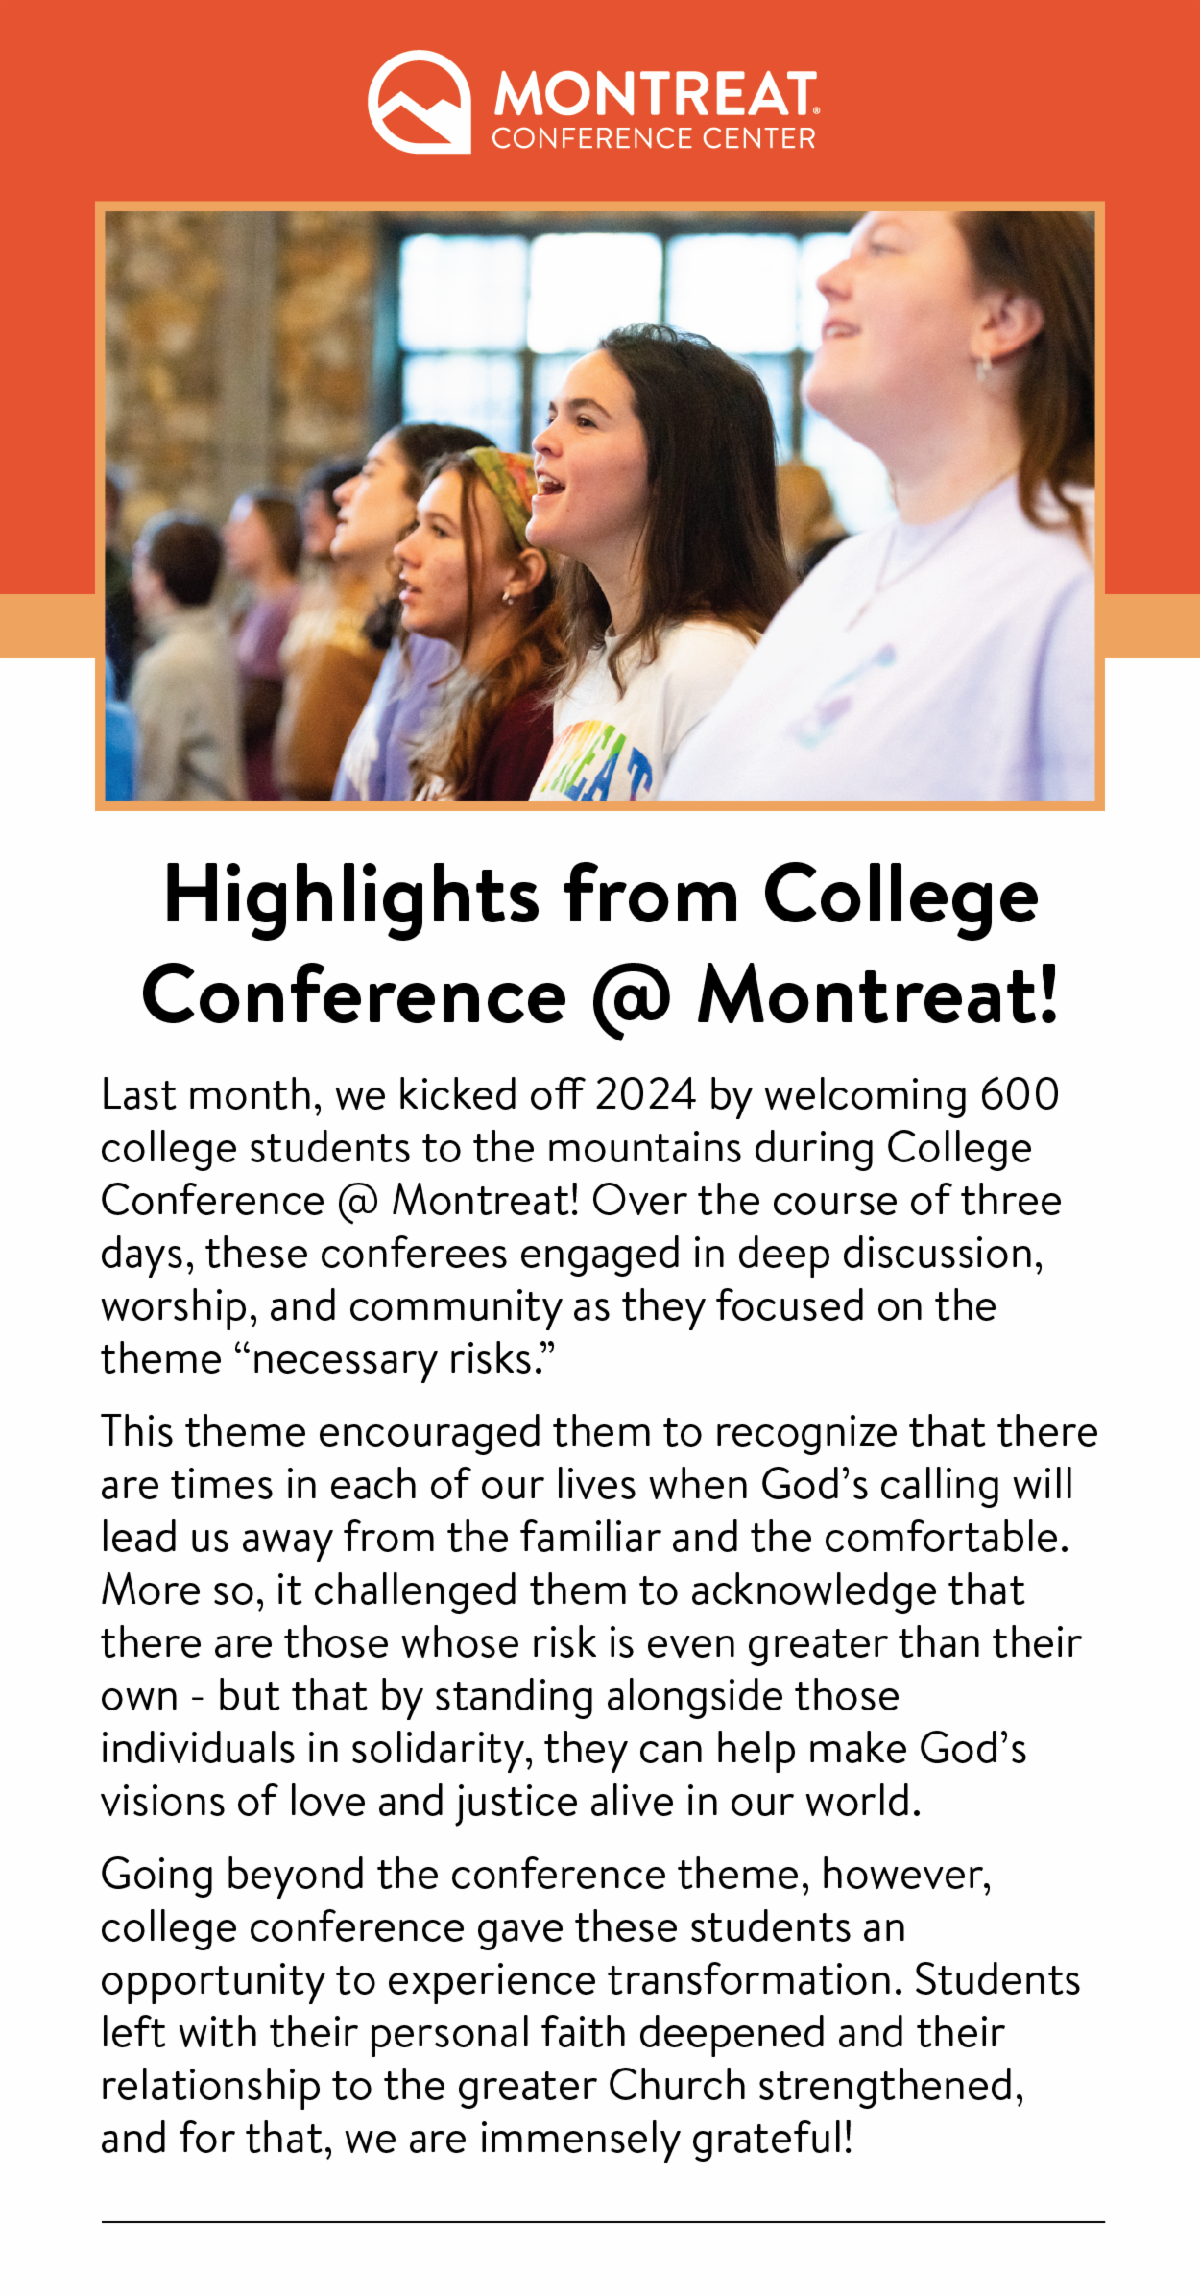 Highlights from College Conference @ Montreat! - Last month, we kicked off 2024 by welcoming 600 college students to the mountains during College Conference @ Montreat! Over the course of three days, these conferees engaged in deep discussion, worship, and community as they focused on the theme “necessary risks.”  This theme encouraged them to recognize that there are times in each of our lives when God’s calling will lead us away from the familiar and the comfortable. More so, it challenged them to acknowledge that there are those whose risk is even greater than their own - but that by standing alongside those individuals in solidarity, they can help make God’s visions of love and justice alive in our world. Going beyond the conference theme, however, college conference gave these students an opportunity to experience transformation. Students left with their personal faith deepened and their relationship to the greater Church strengthened, and for that, we are immensely grateful!